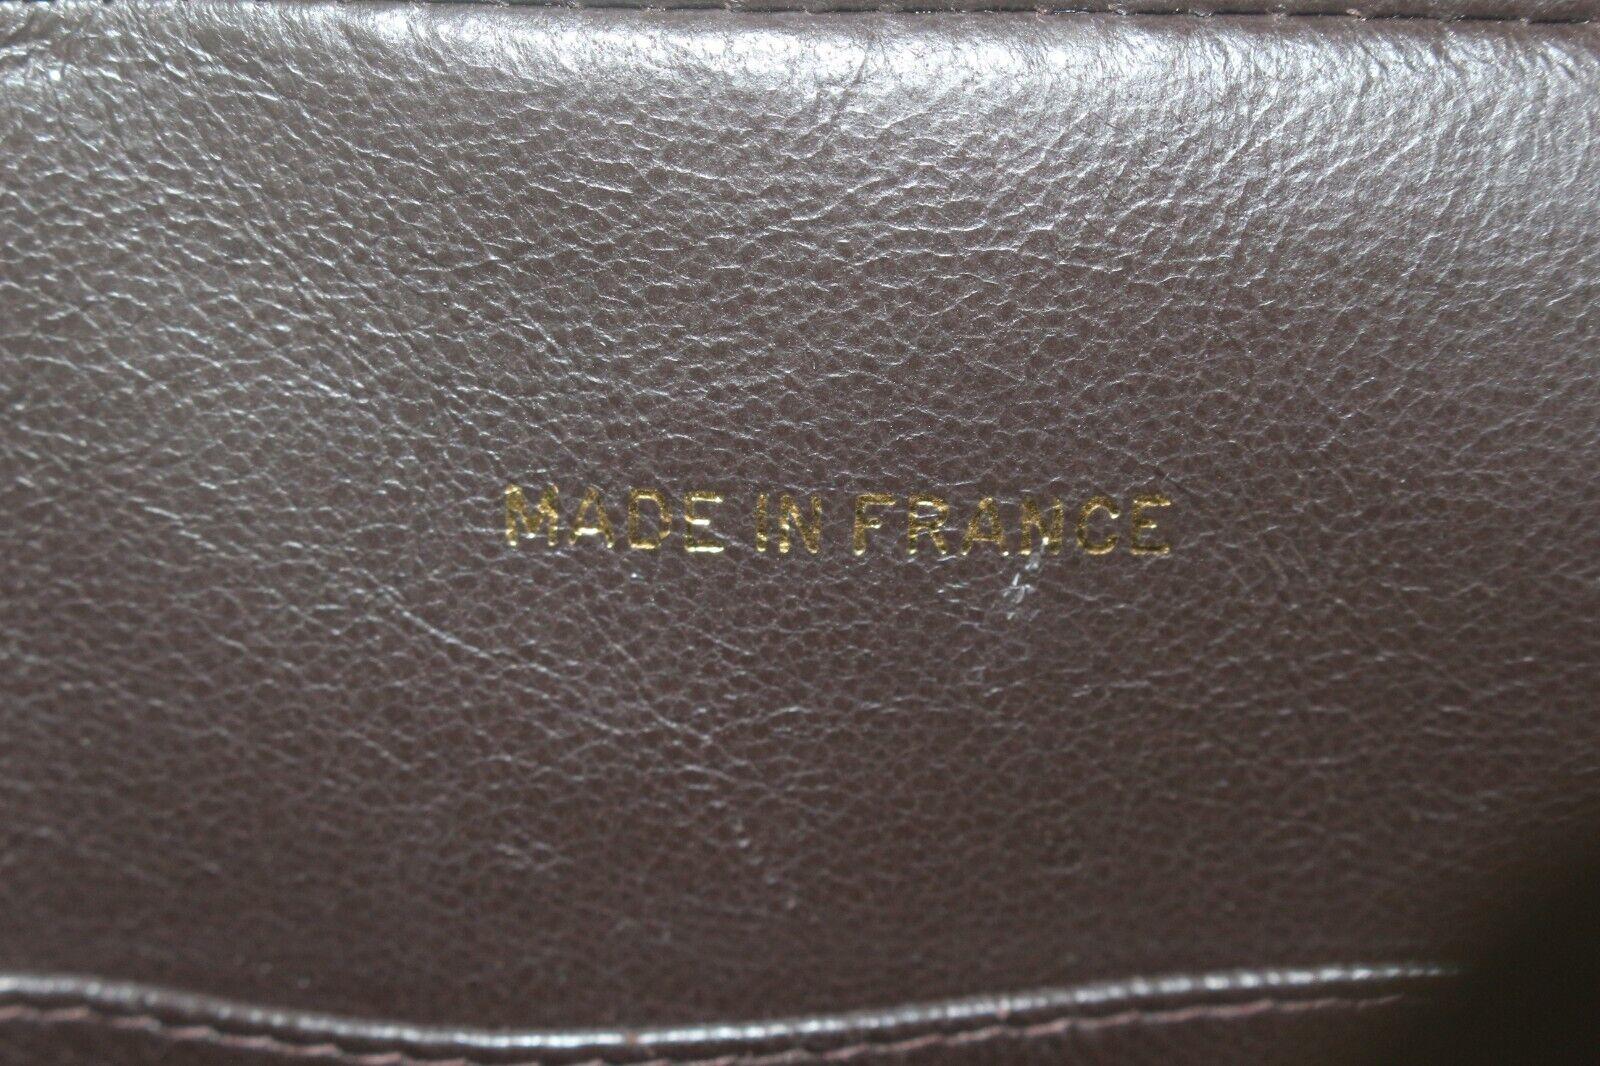 
Date Code/Serial Number: 3070192

Made In: France

Measurements: Length:  9